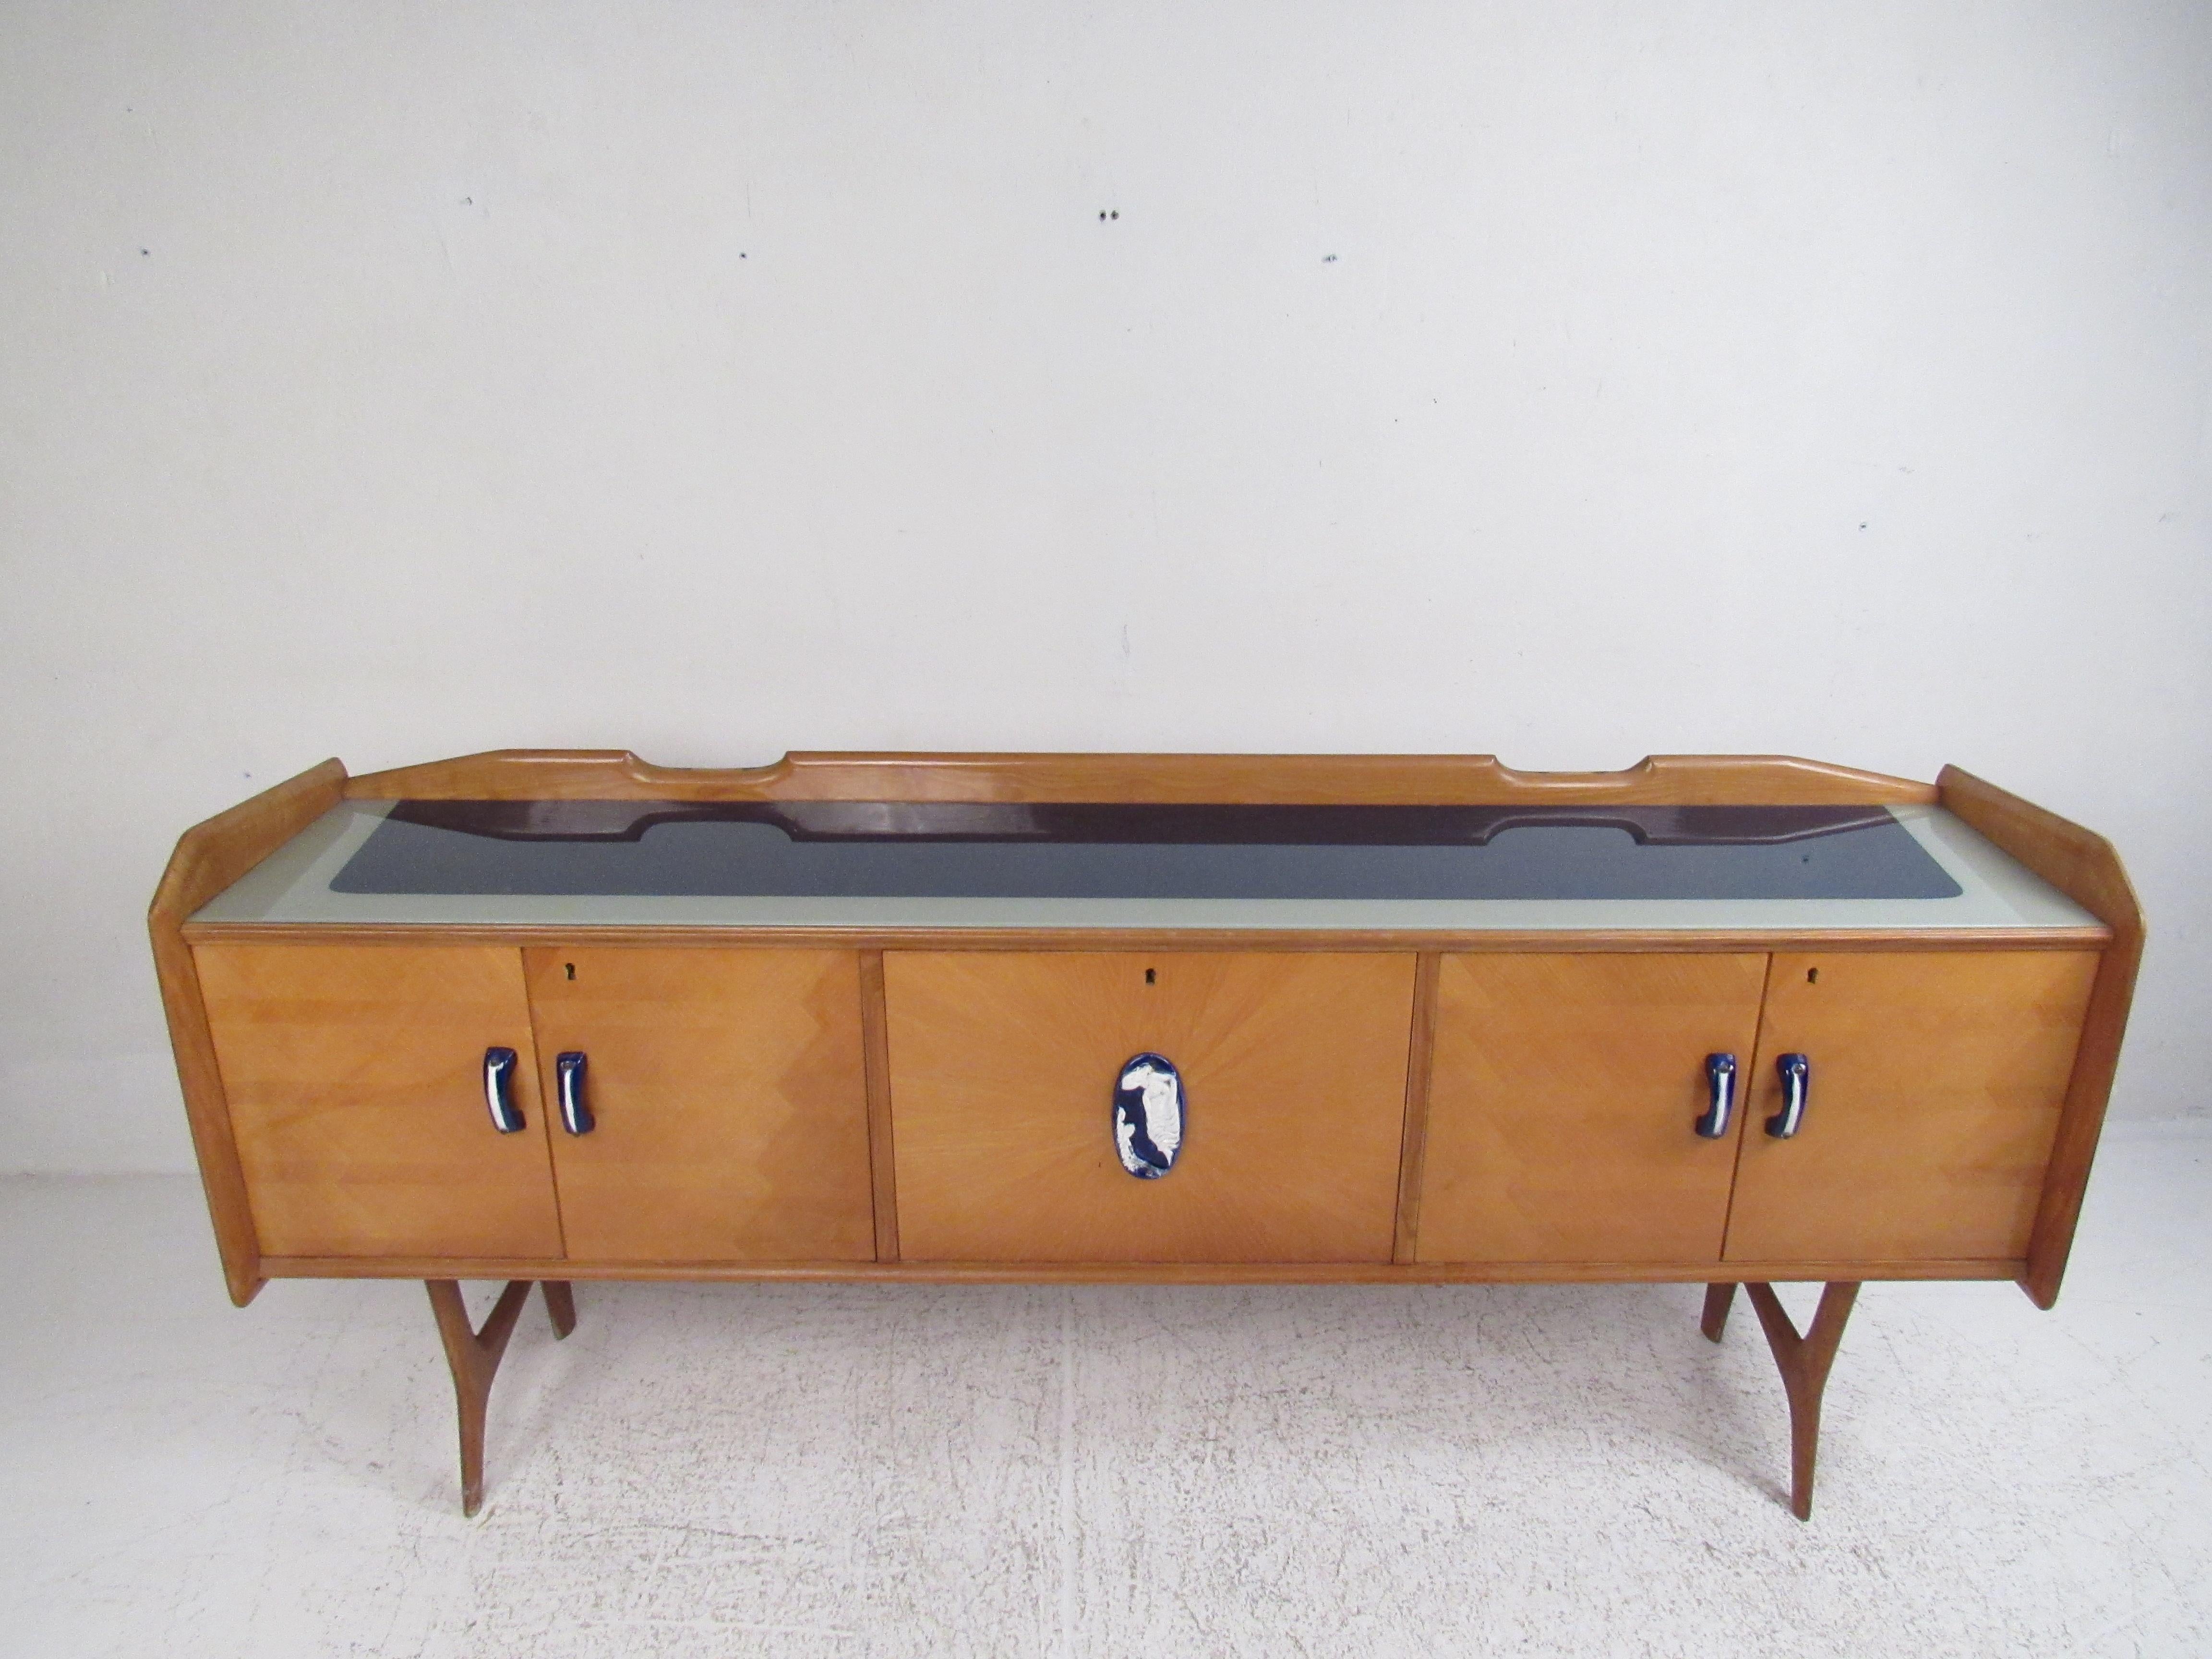 This stunning vintage modern sideboard features cobalt handles on the cabinet doors. An unusual Ico Parisi style design that has a two-tone glass top. The raised edges along the top add to the mid-century appeal. This sleek case piece offers plenty